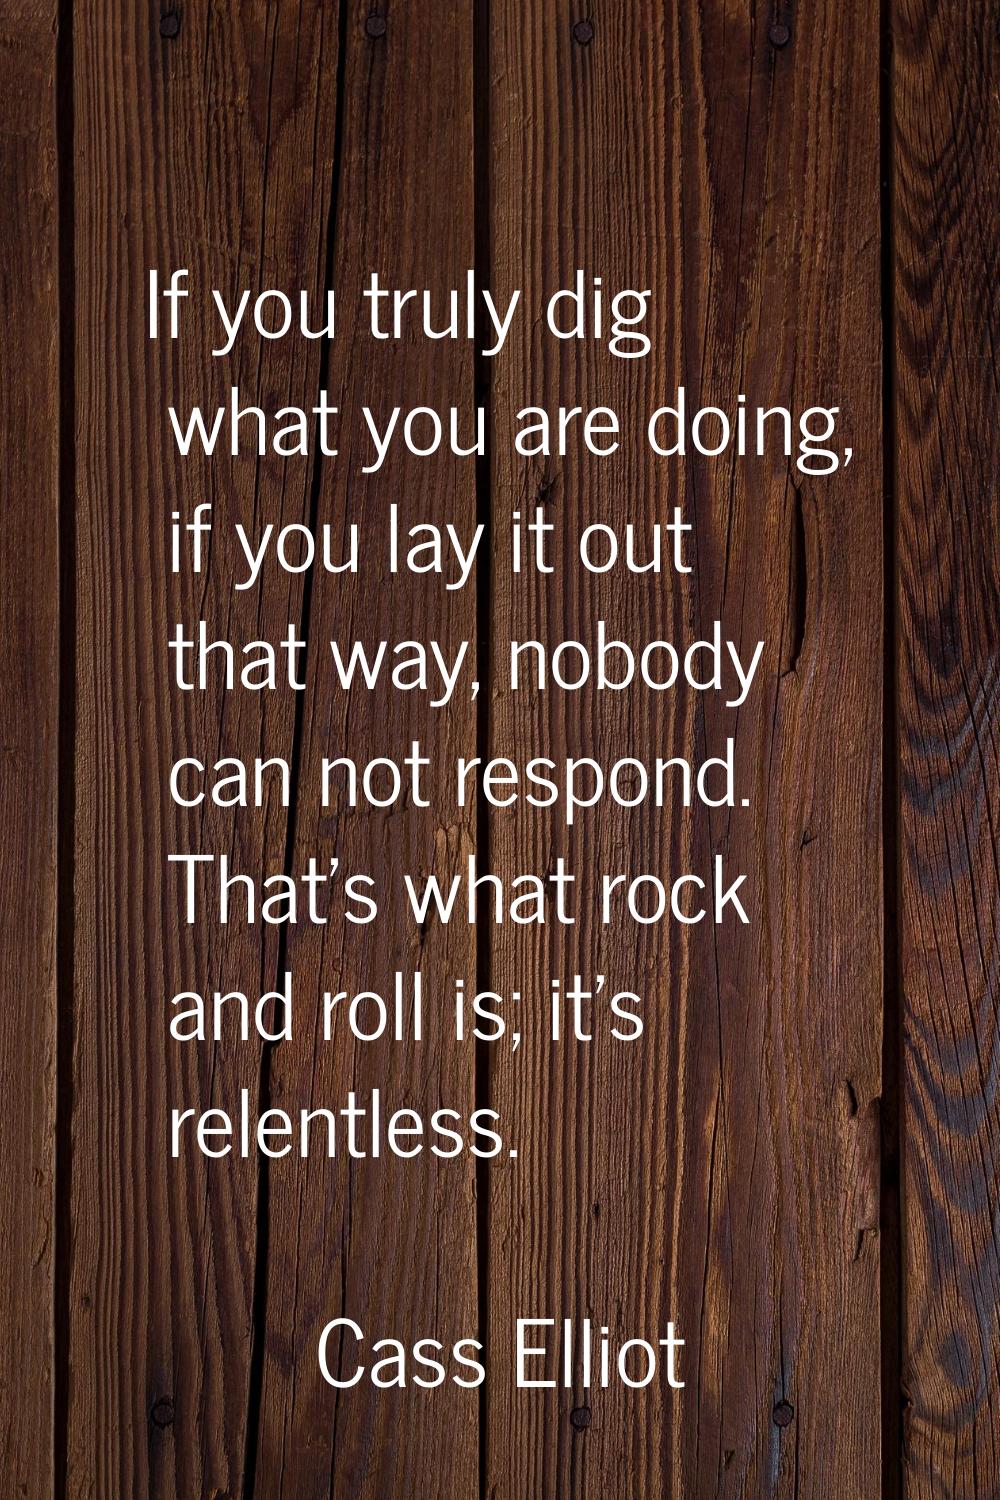 If you truly dig what you are doing, if you lay it out that way, nobody can not respond. That's wha